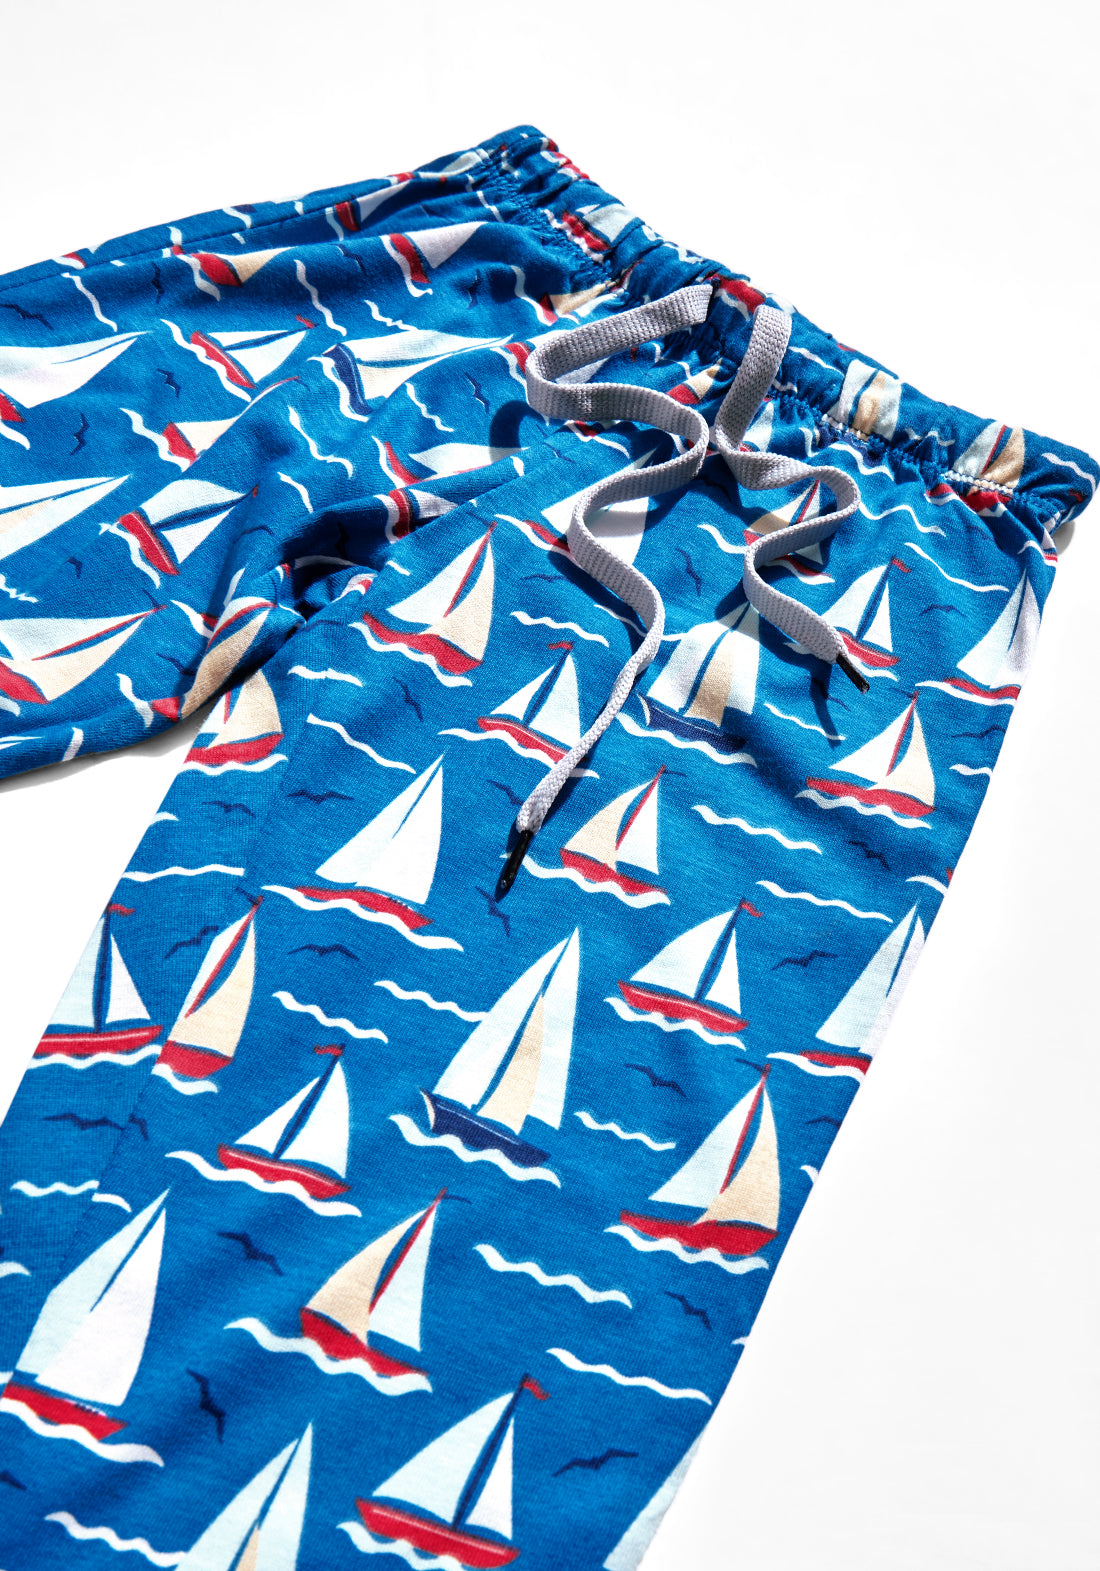 RED, WHITE AND BLUE BOAT PRINT KNITTED PANTS